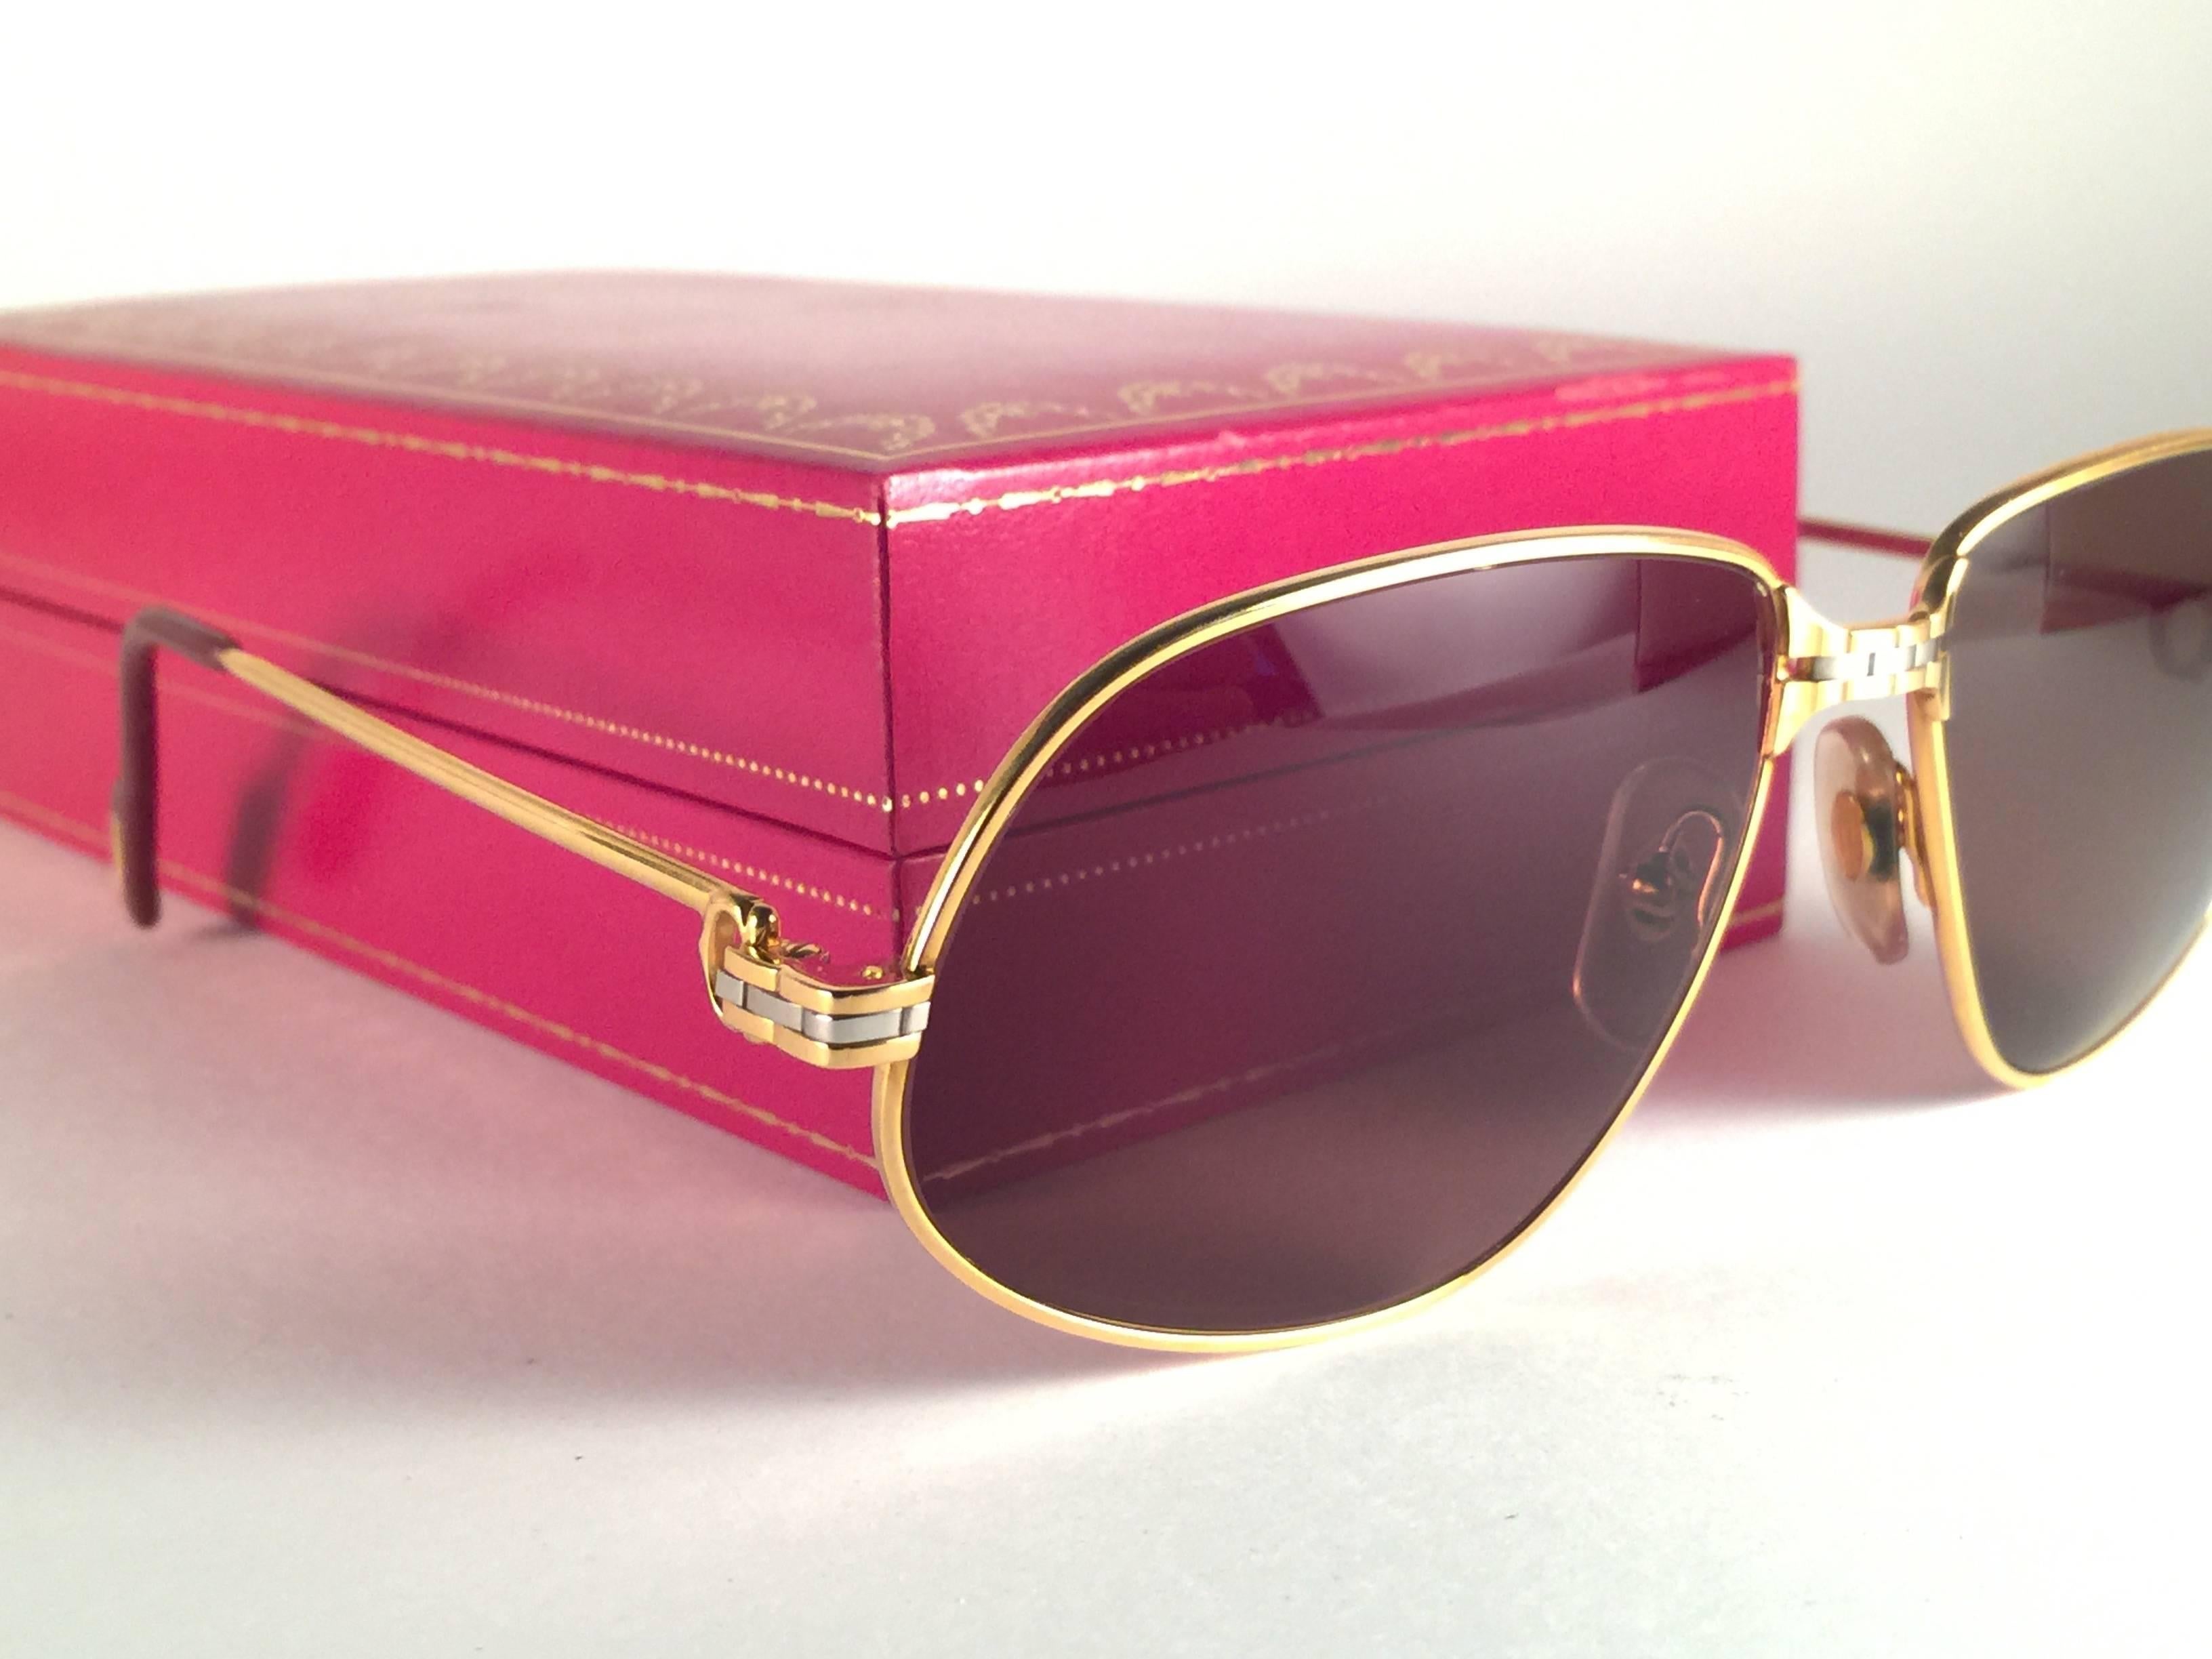 New Vintage Cartier Panthere 59mm Medium Sunglasses France 18k Gold Heavy Plated For Sale 3